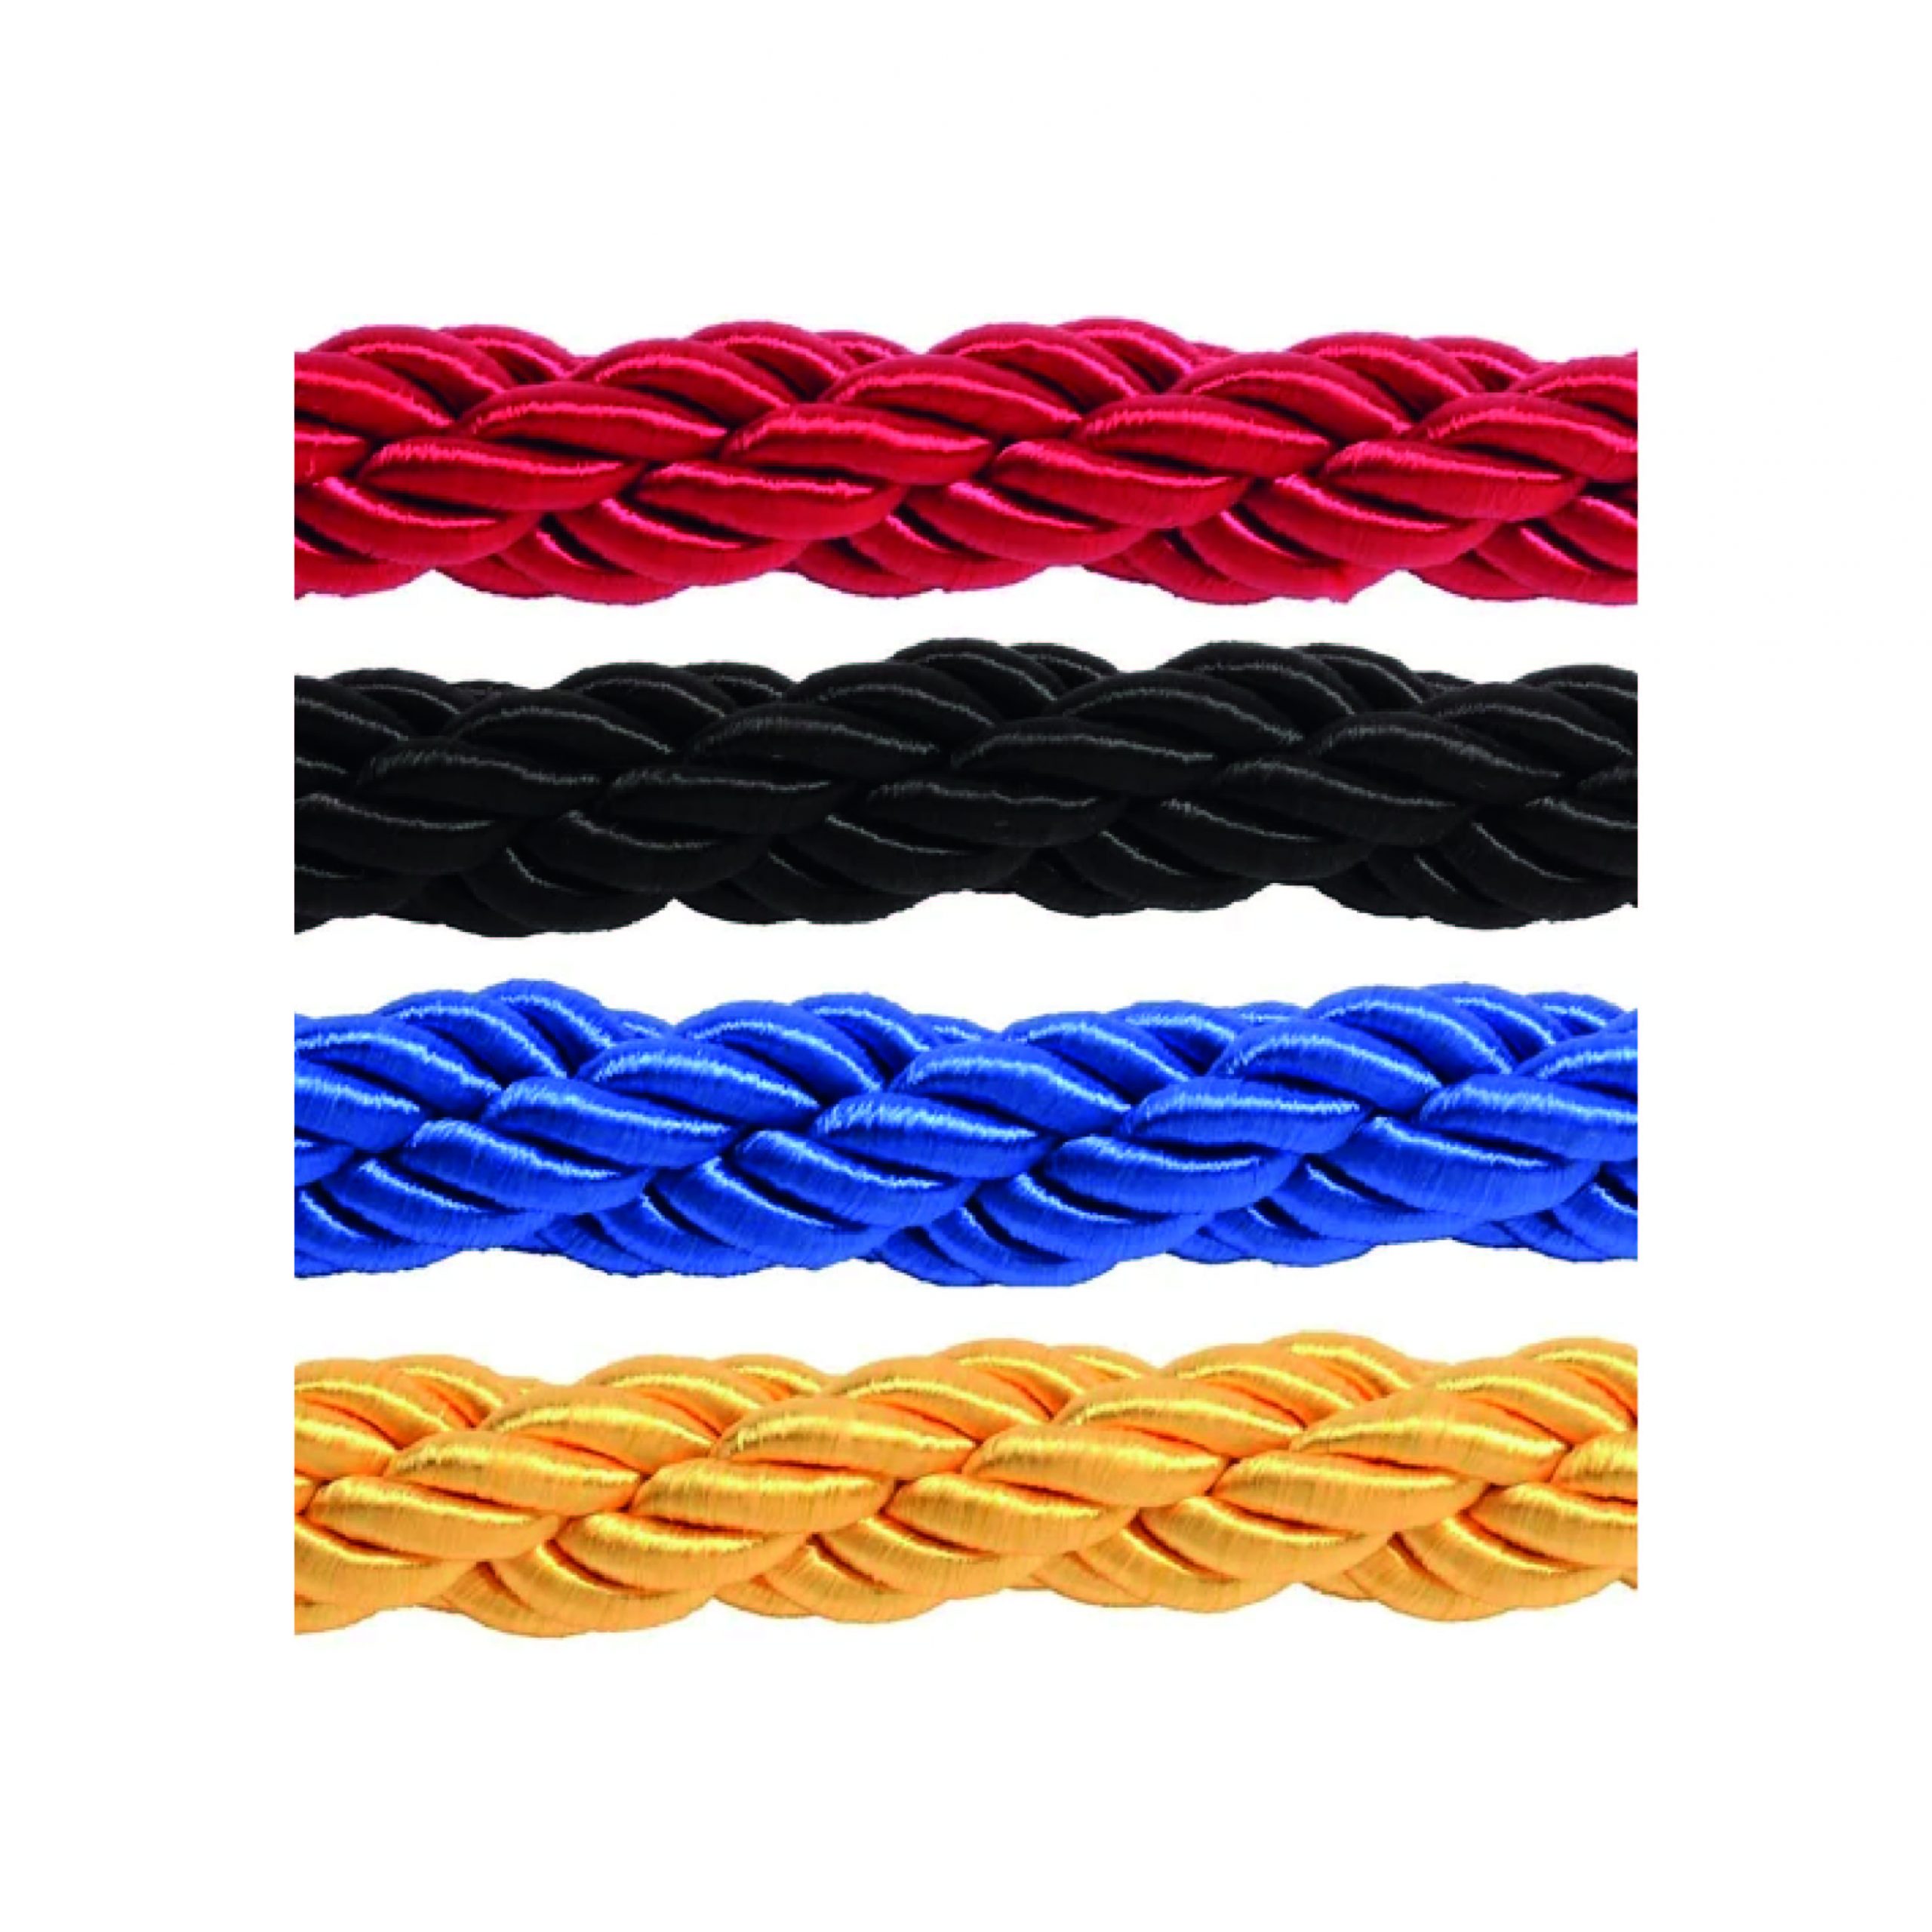 Braided Barrier Rope Colour Options